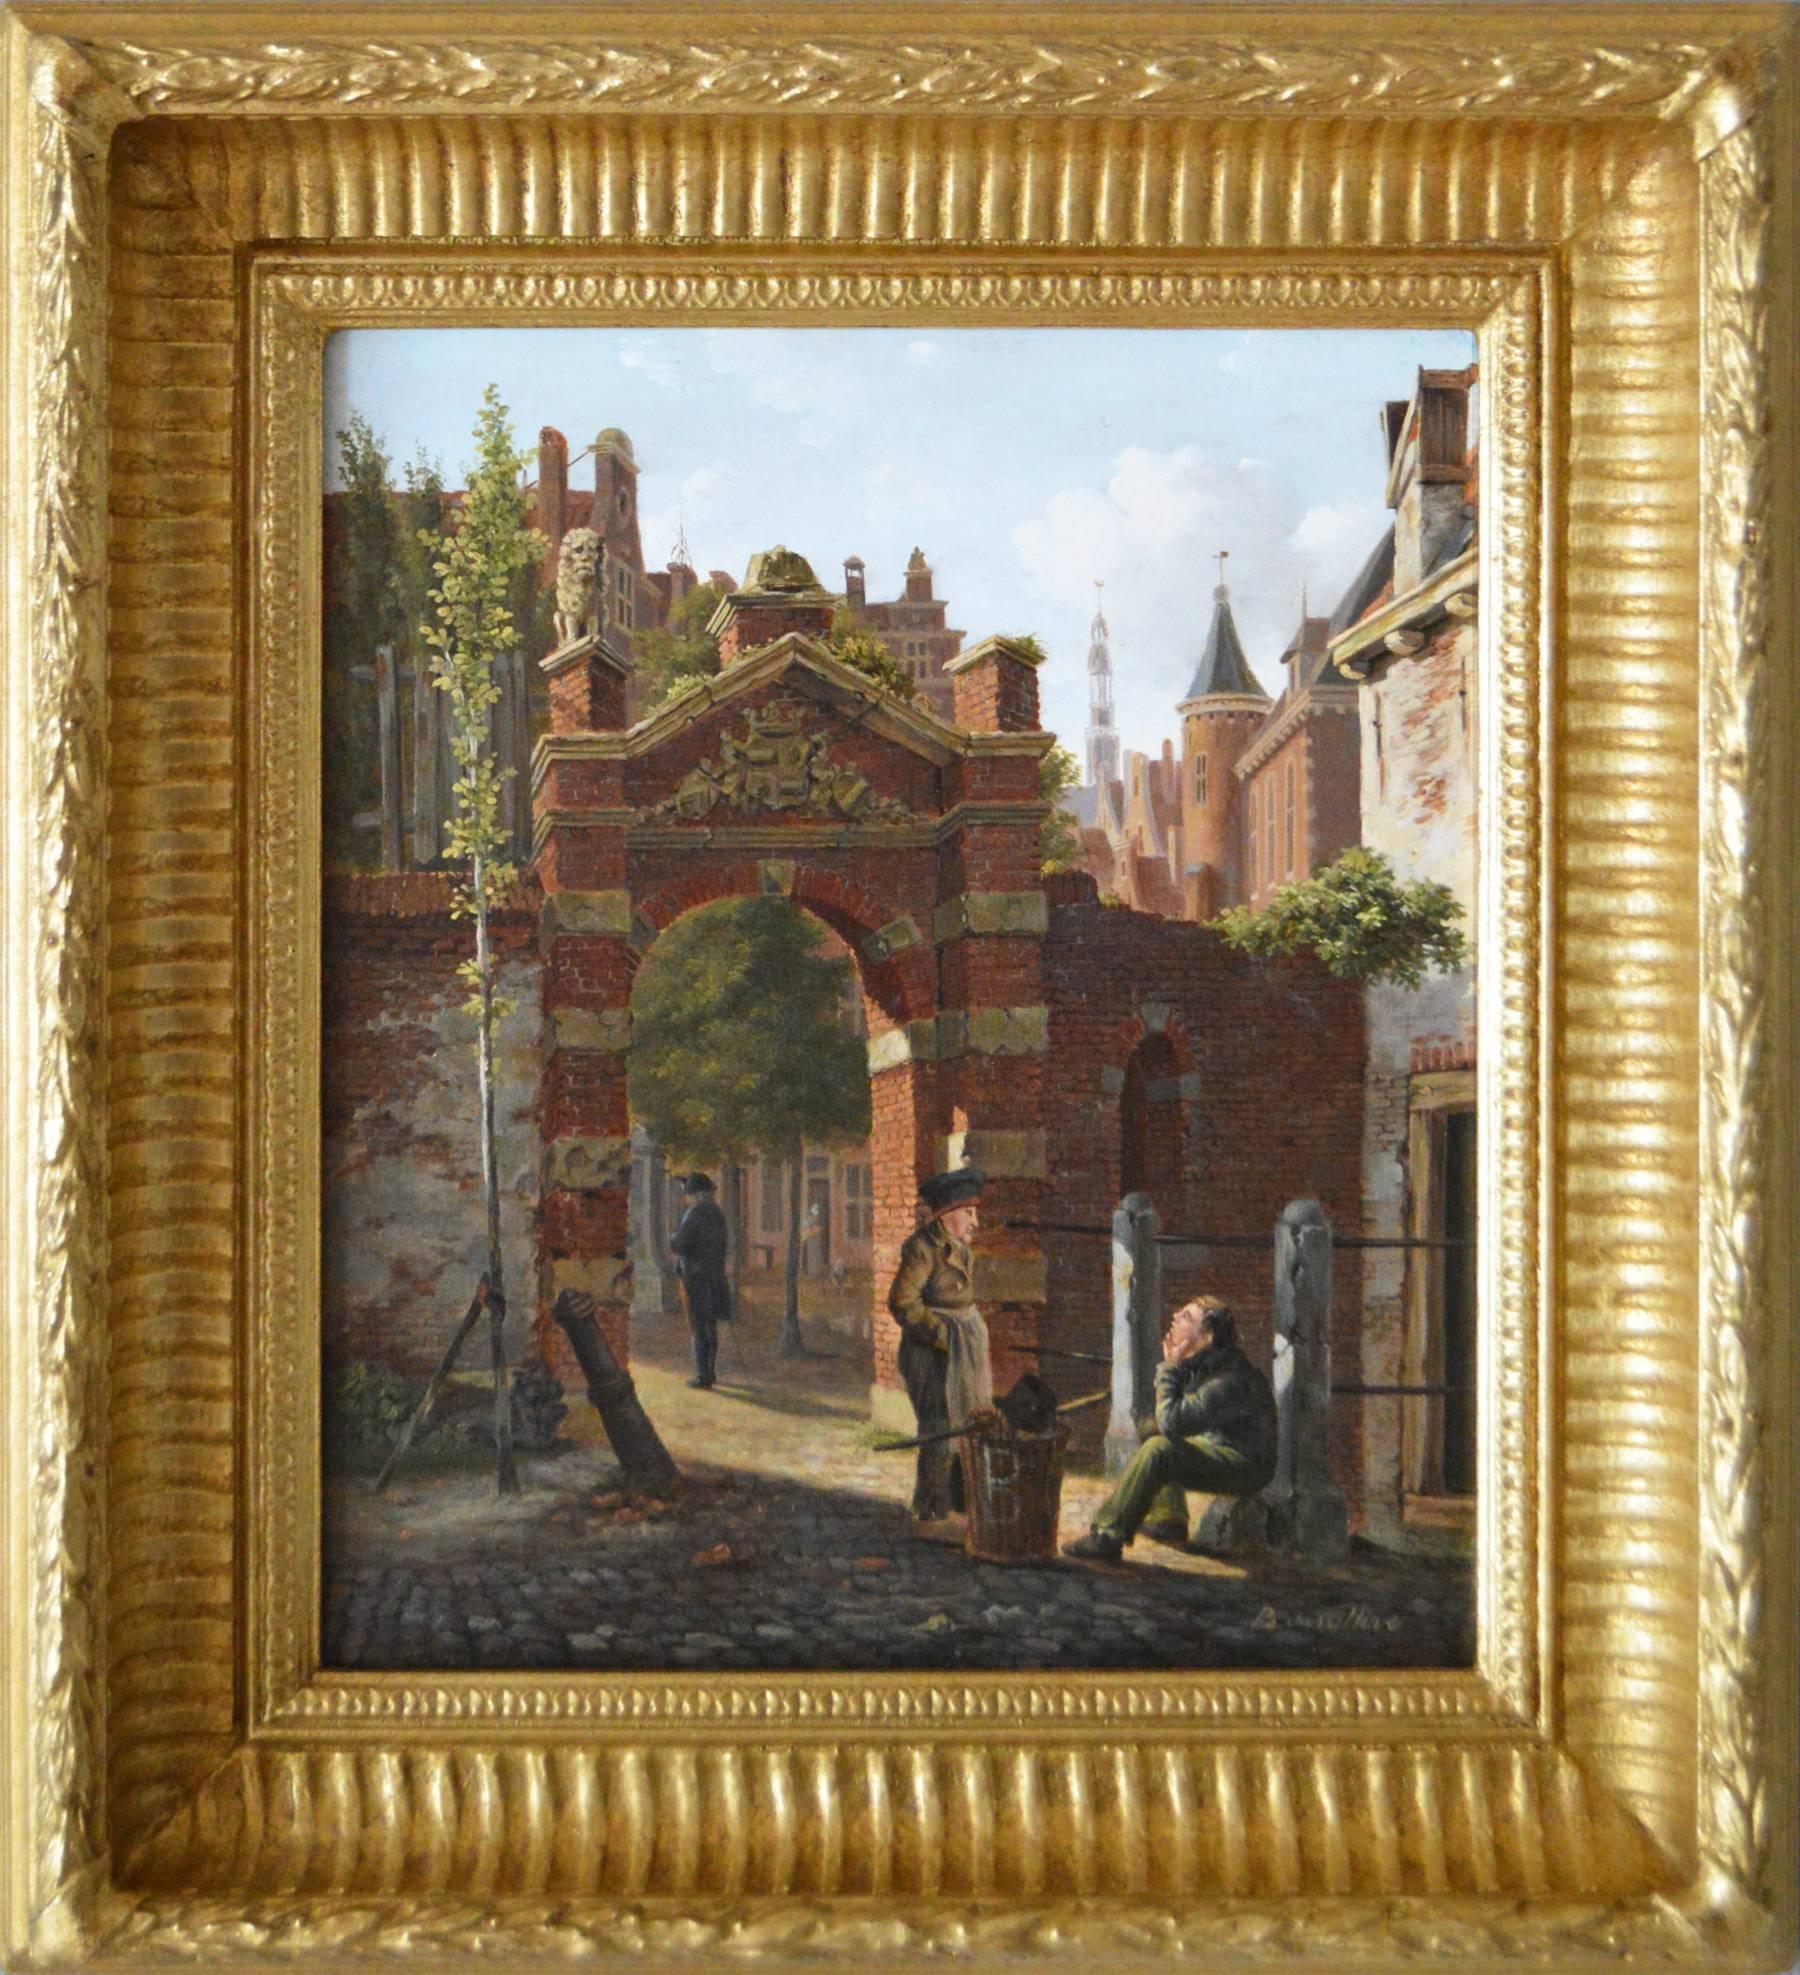 19th Century landscape oil painting of figures in a Dutch townscape